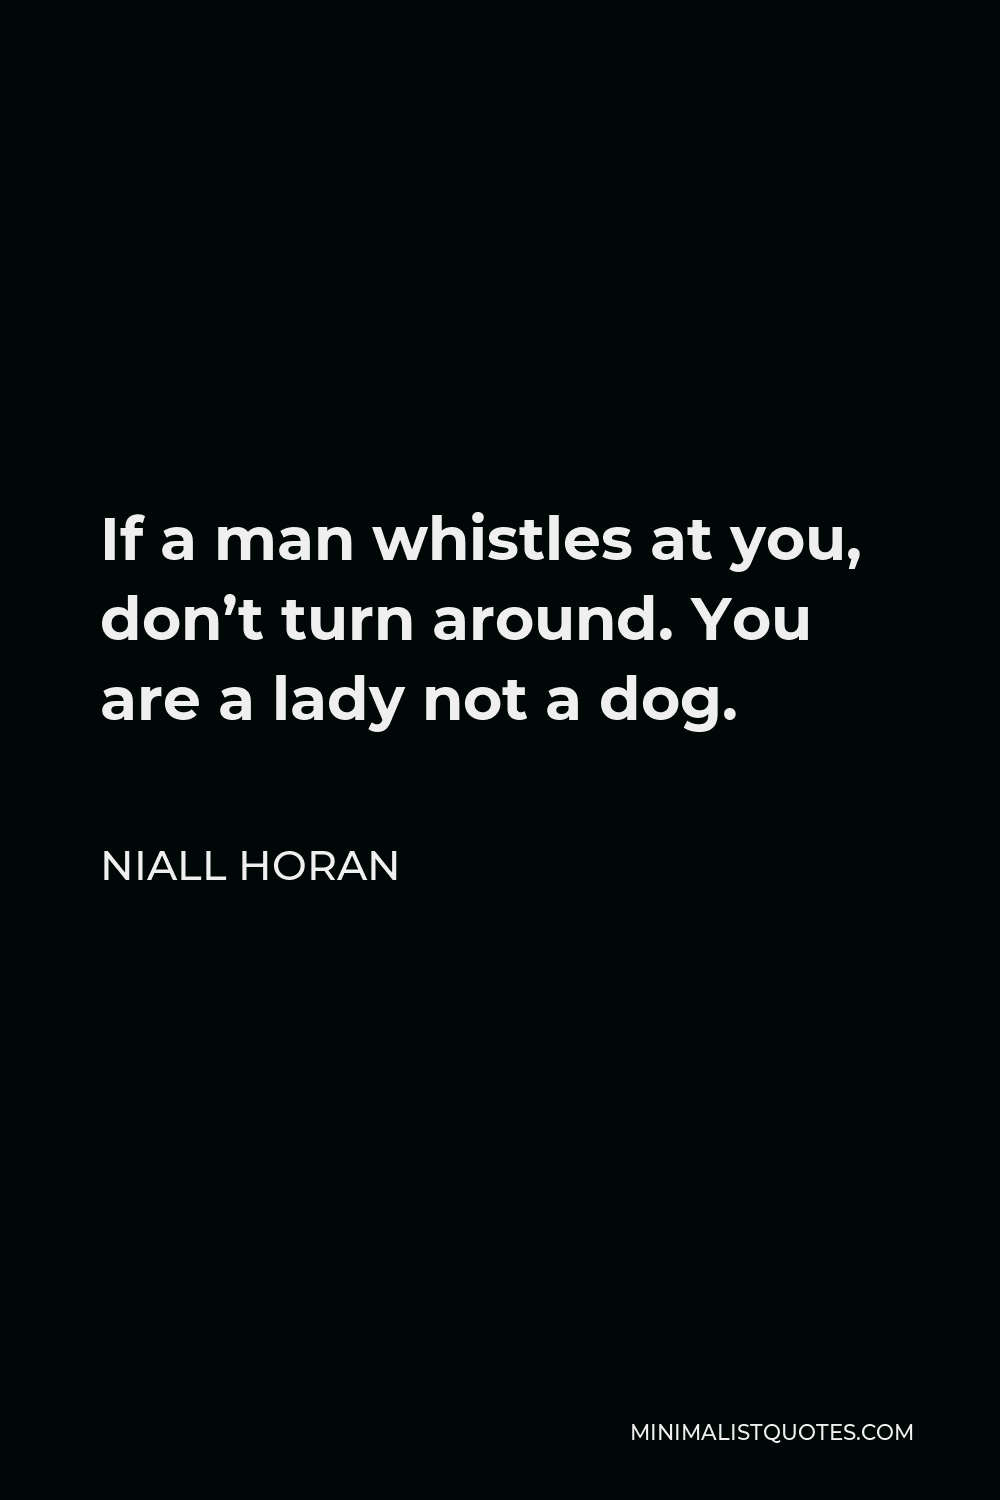 Niall Horan Quote - If a man whistles at you, don’t turn around. You are a lady not a dog.